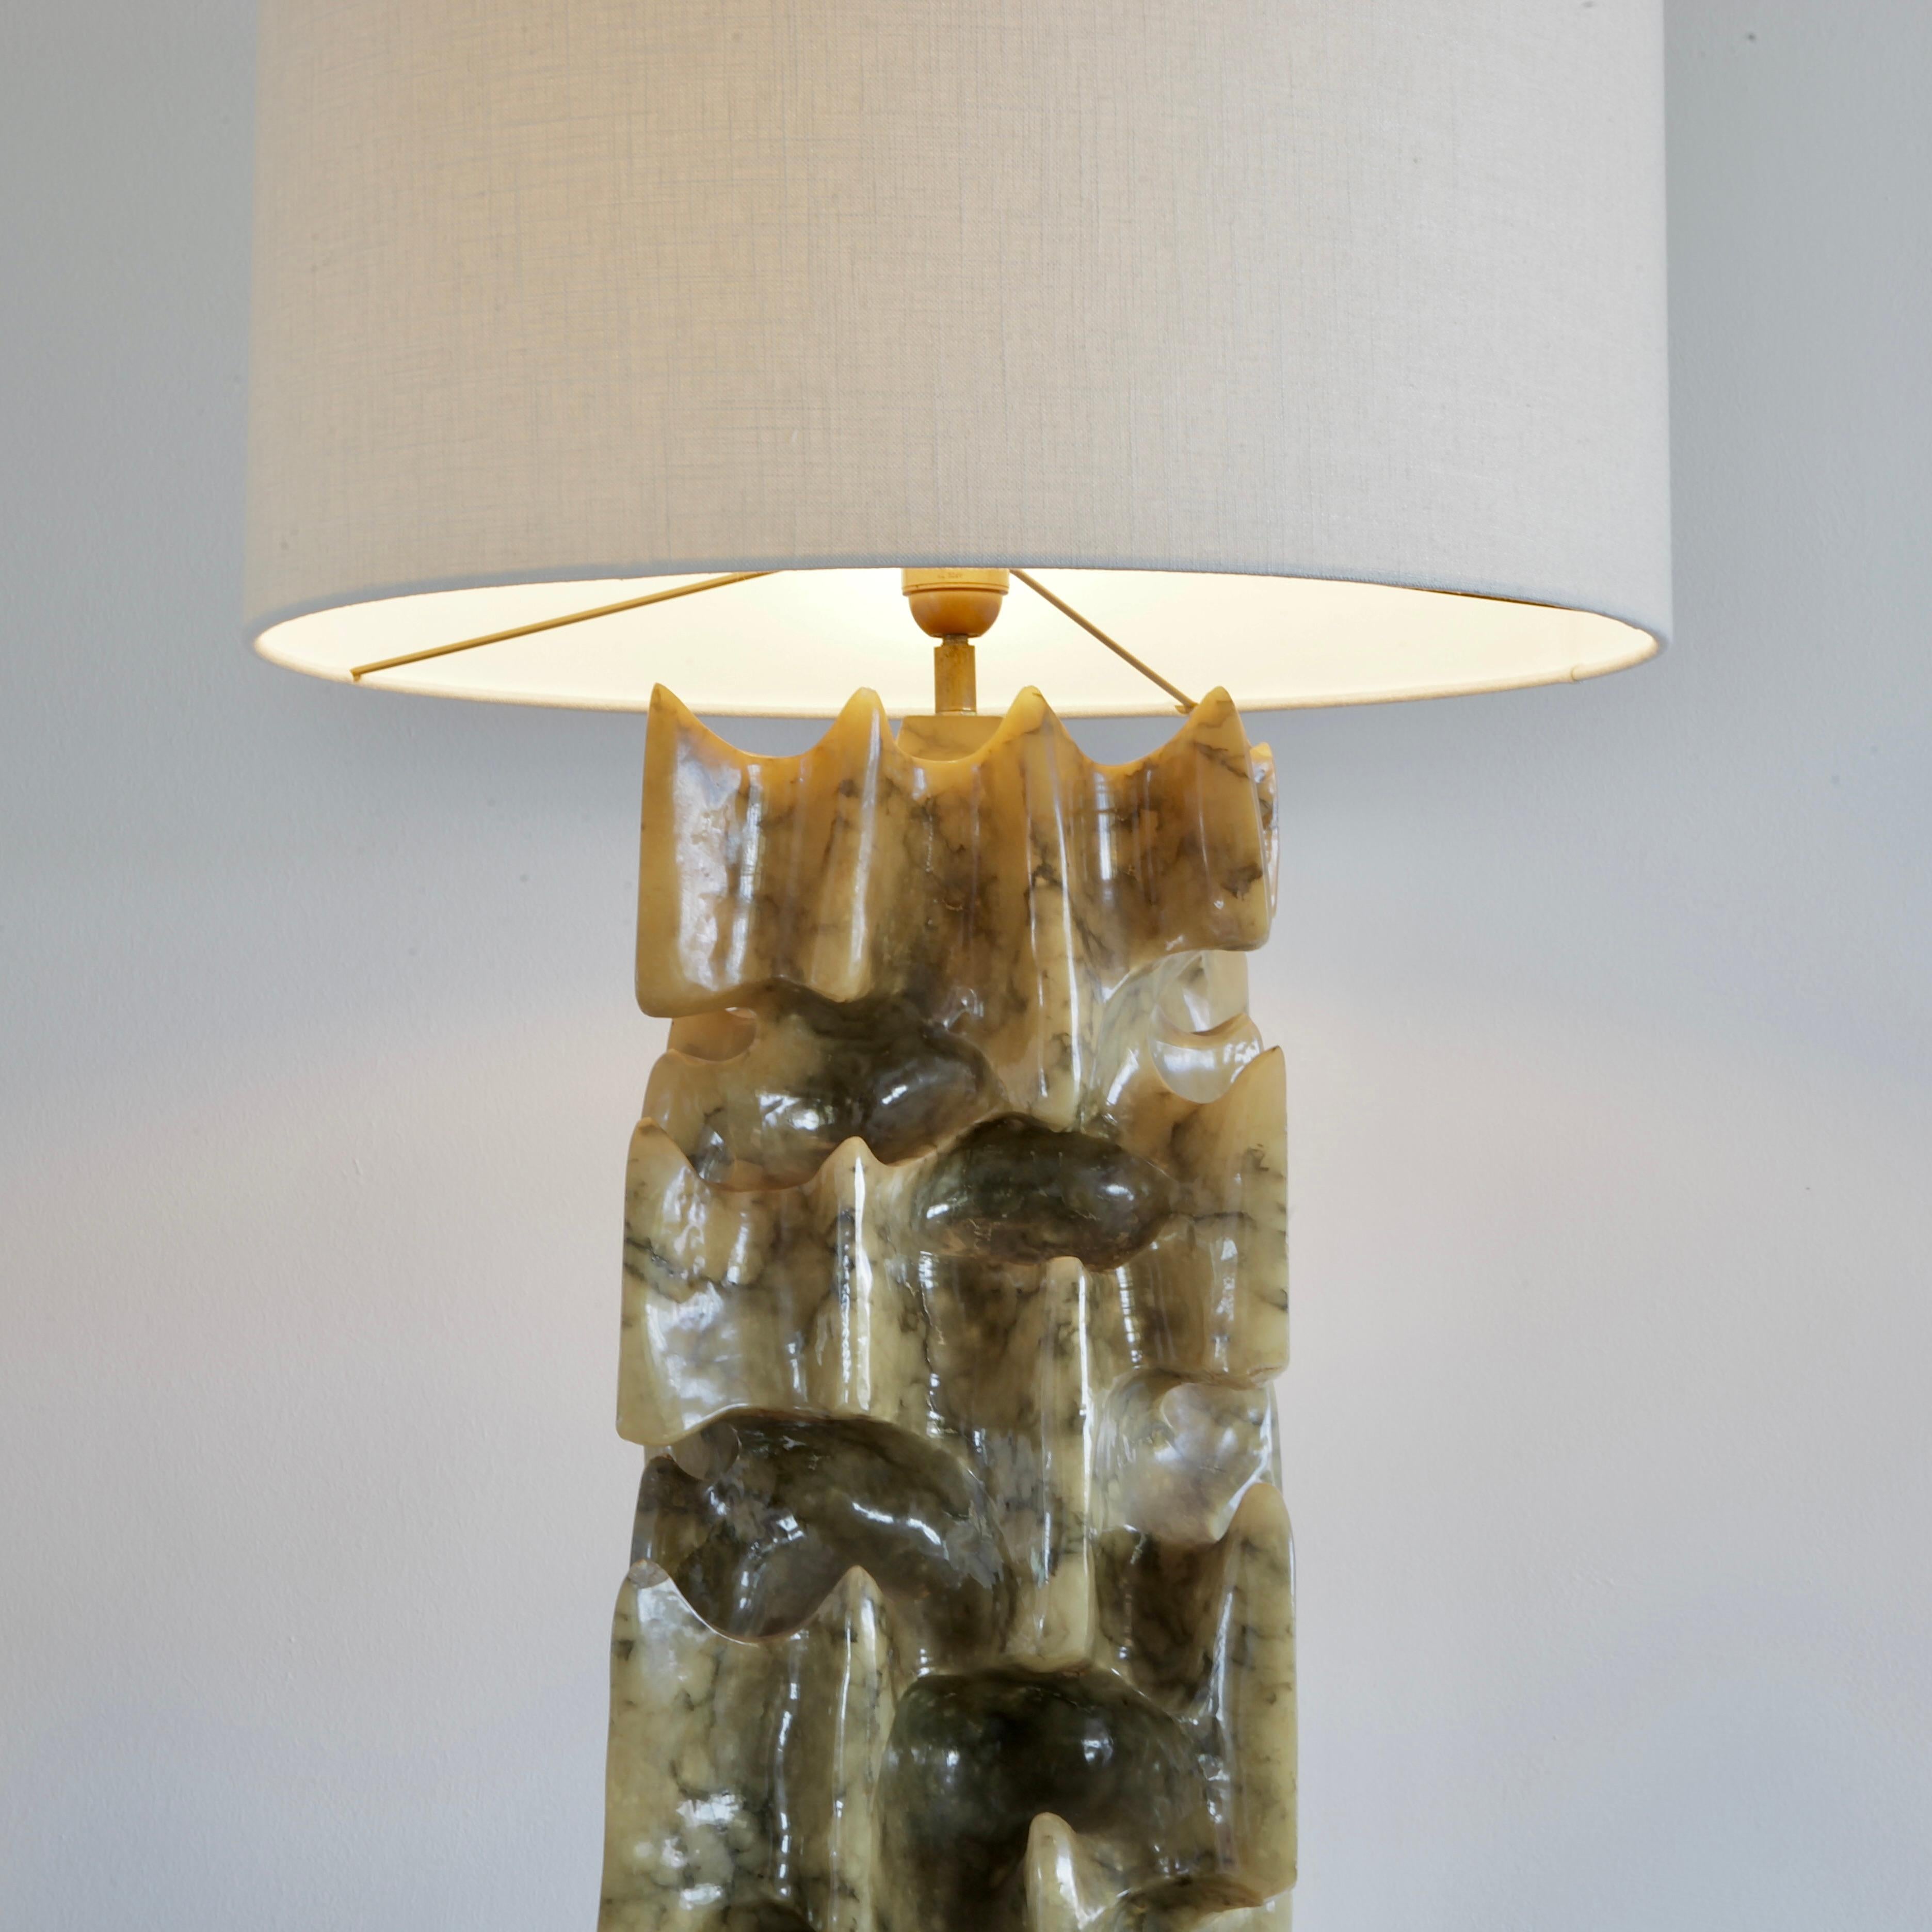 Hand-Carved Unique Large Carved Alabaster Table Lamp, 1960s/1970s, Italy For Sale